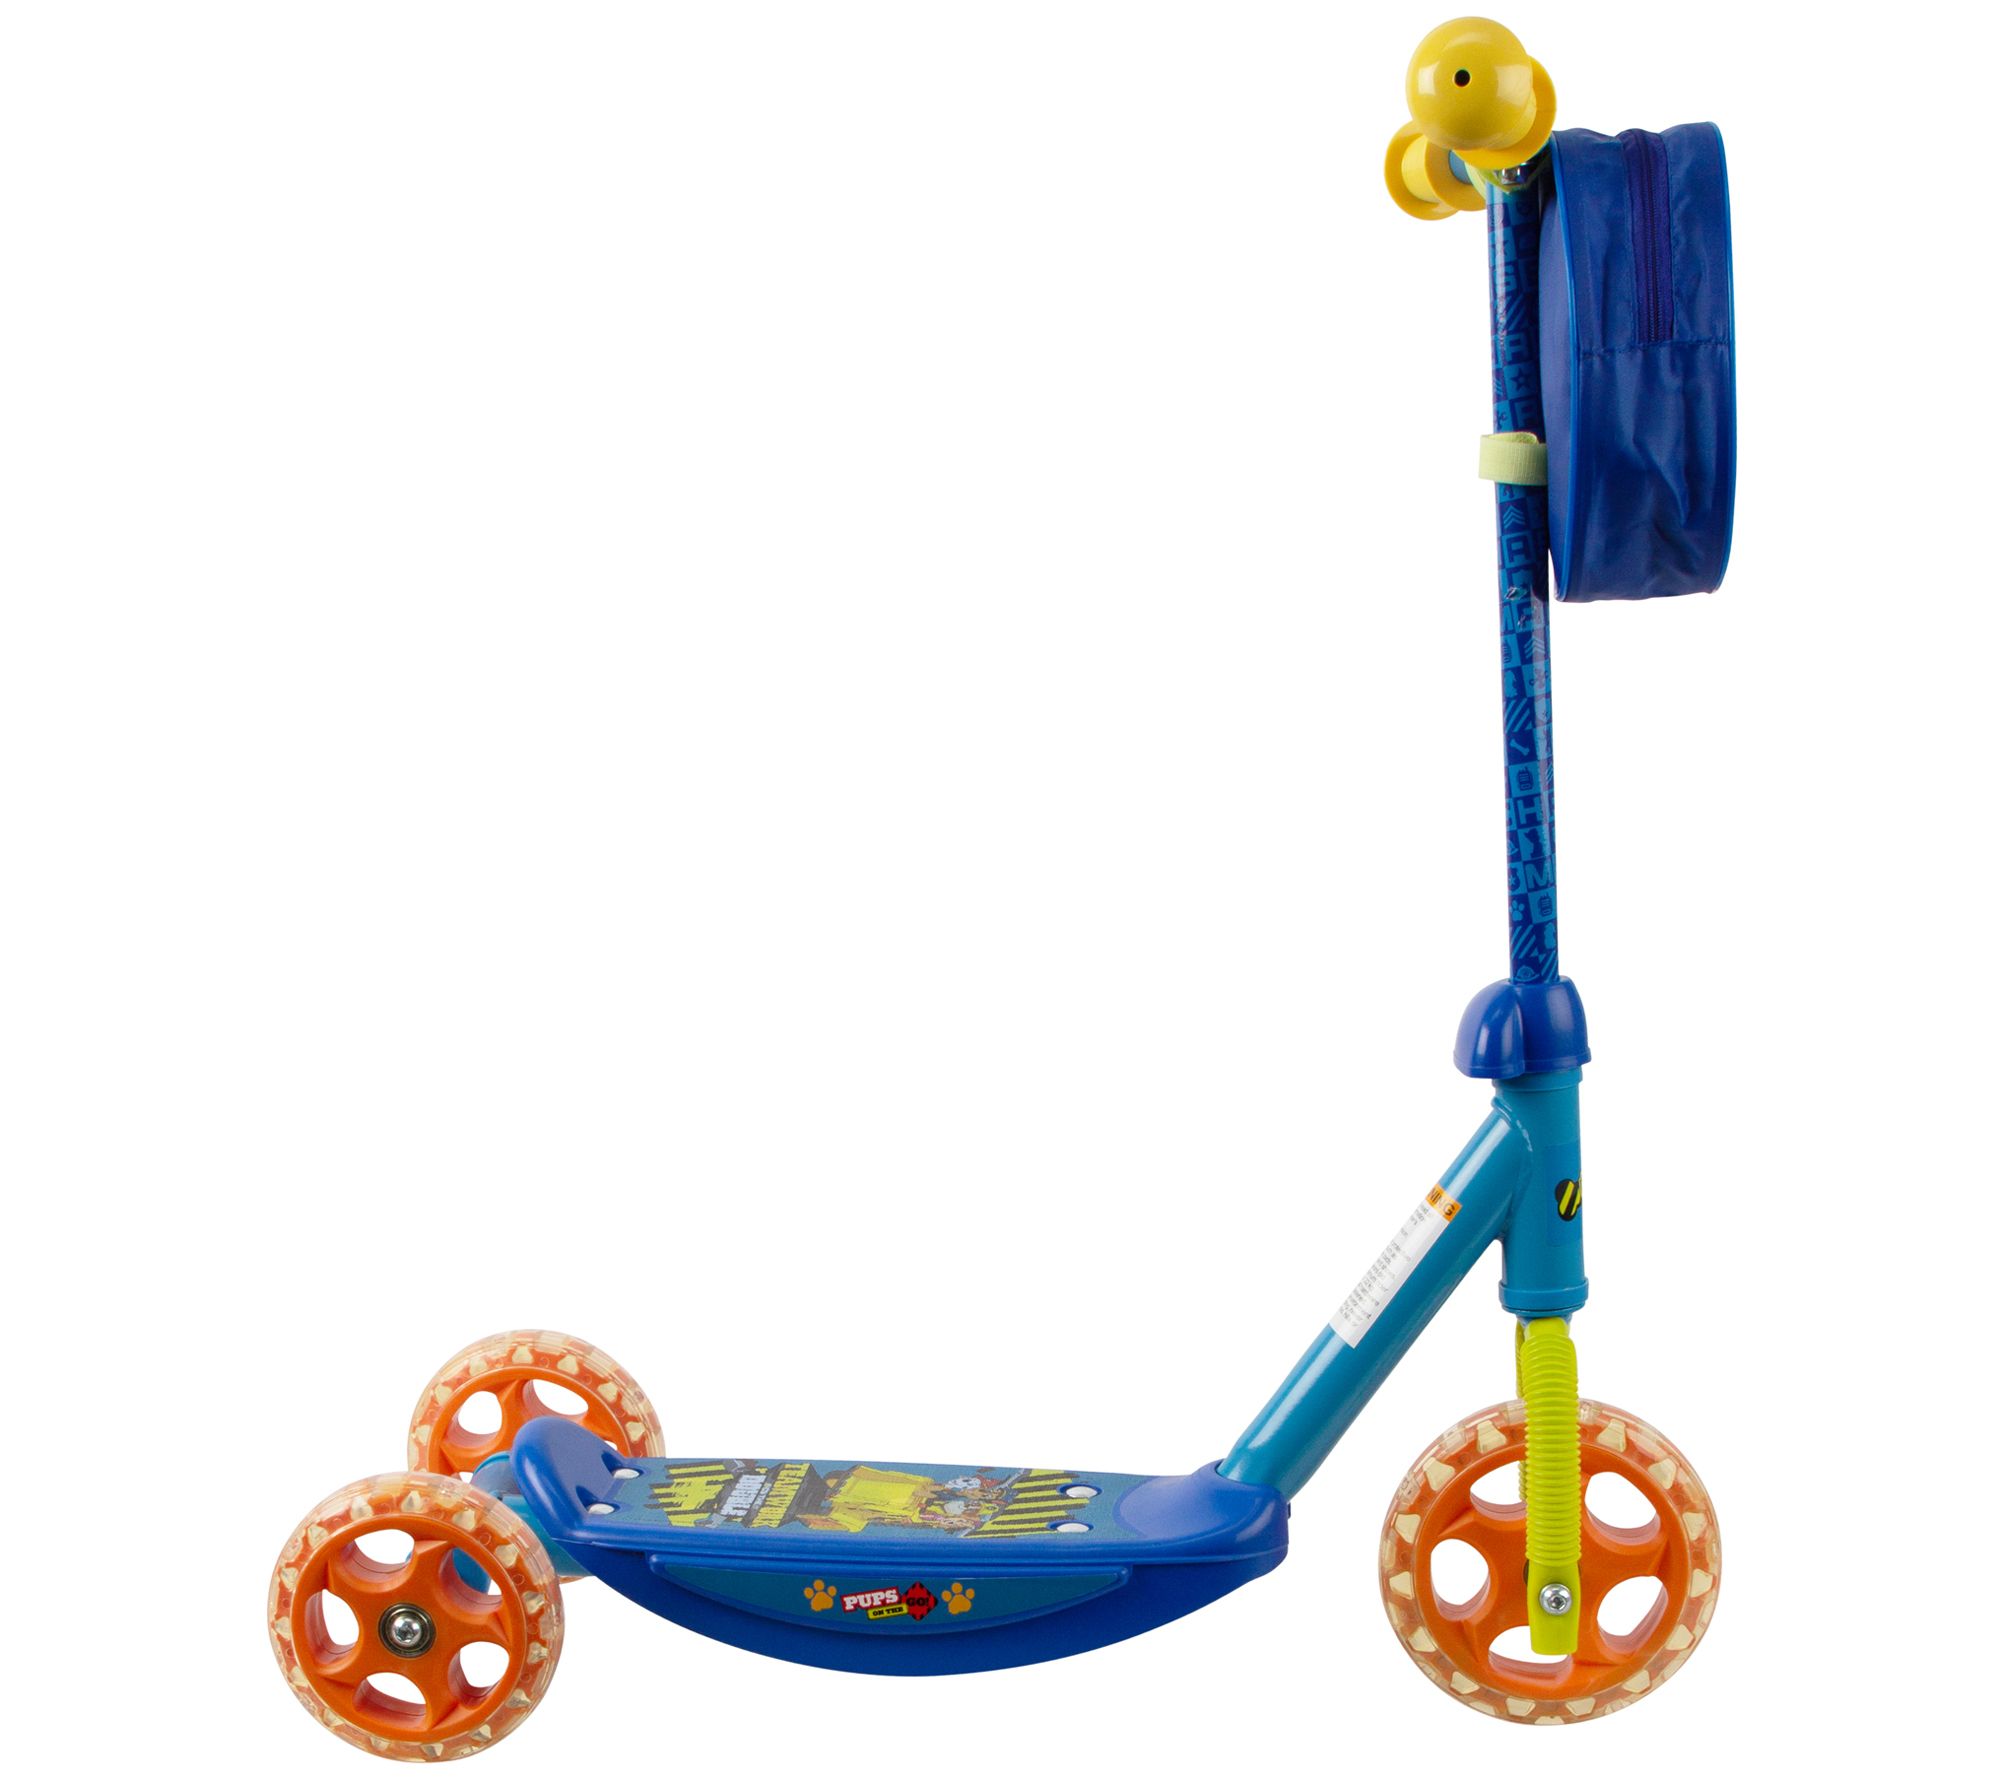 Details about   NIckelodeon Play Wheels Paw Patrol 3-Wheel Light Up Kick Scooter 